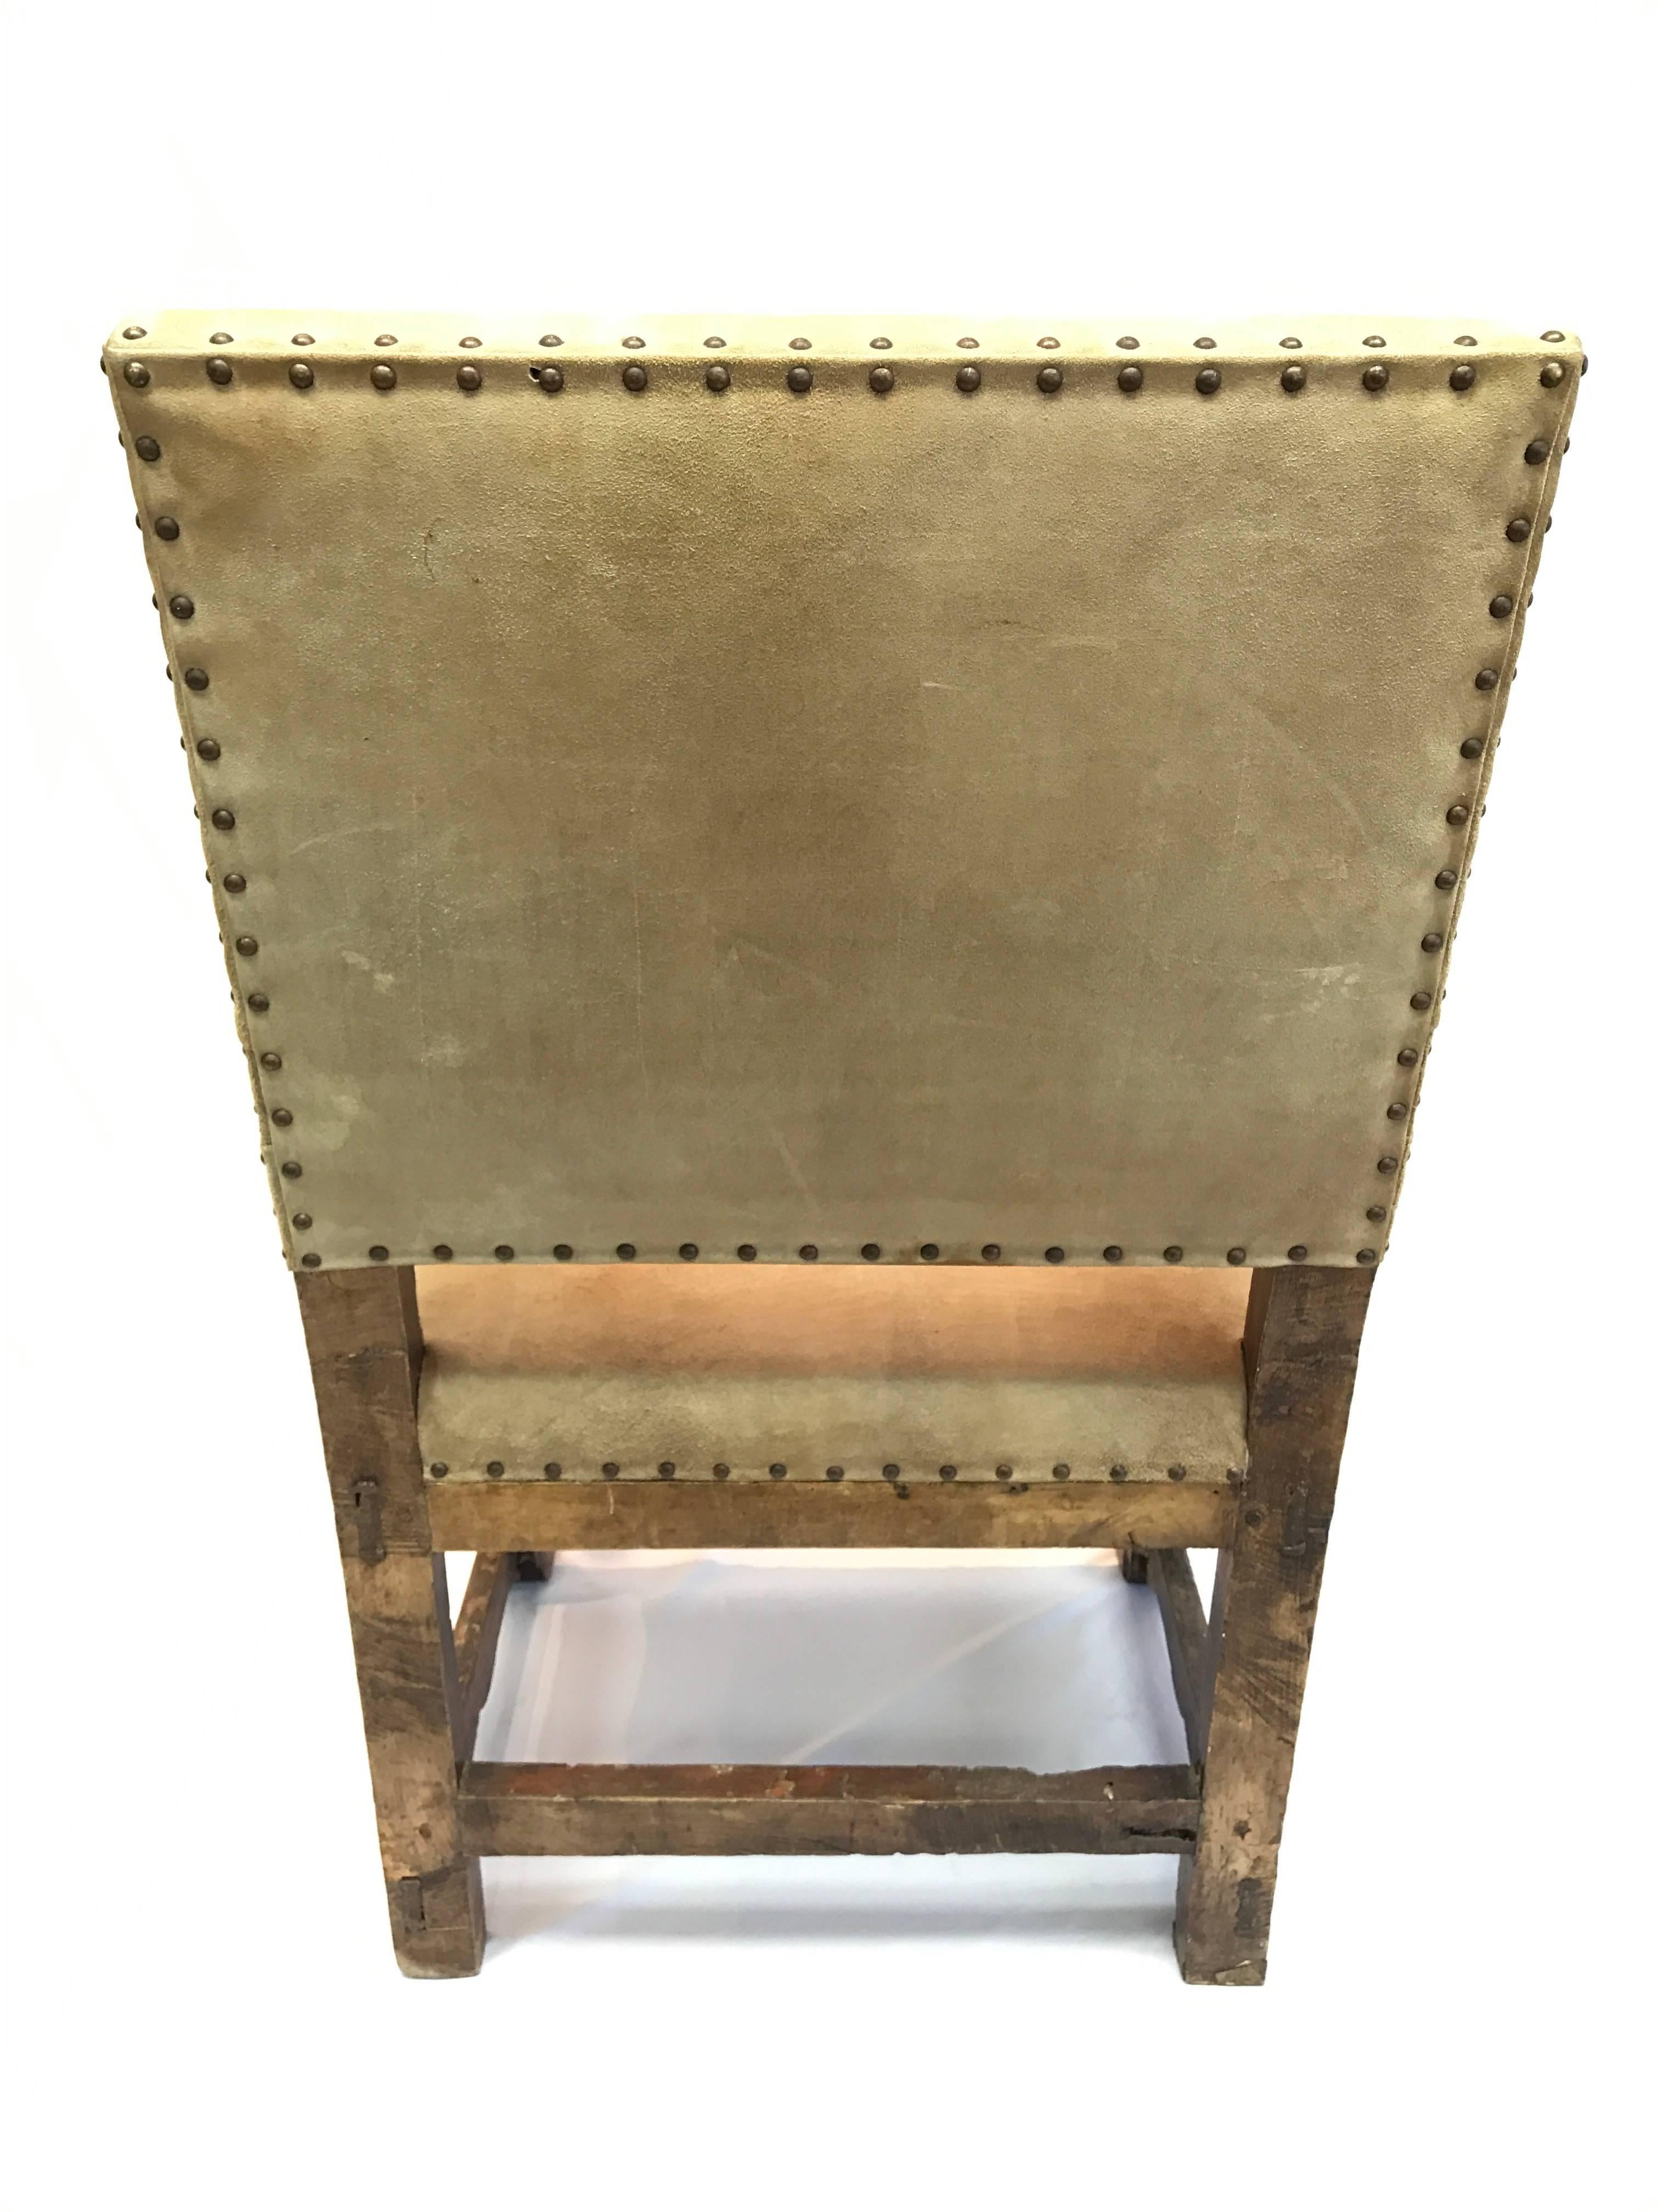 18th Century Peruvian Gold Polychrome Chair In Distressed Condition For Sale In Phoenix, AZ